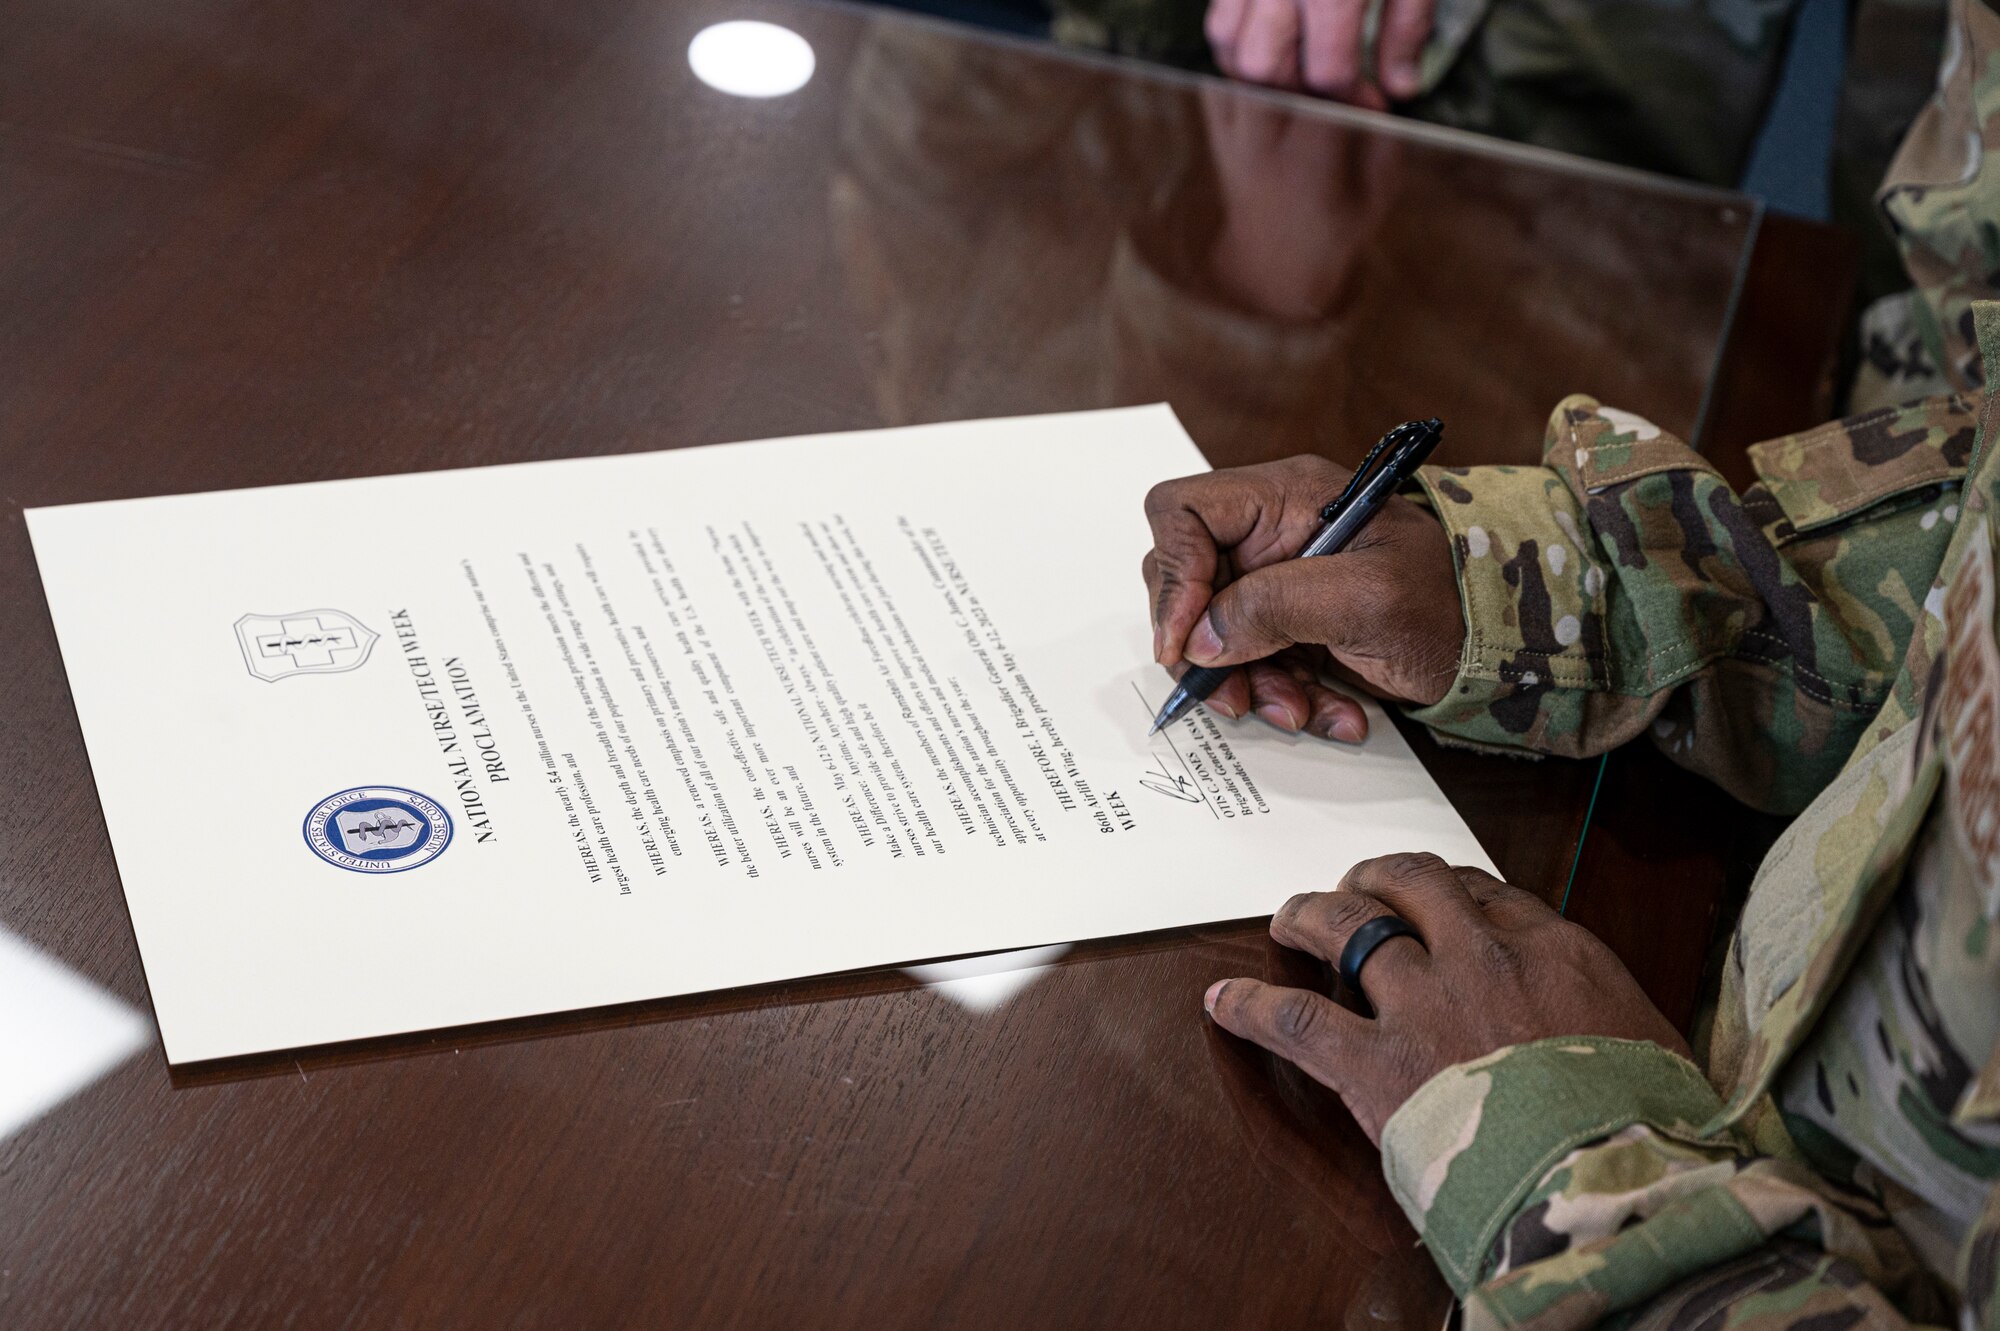 U.S. Air Force Brig. Gen. Otis Jones, 86th Airlift Wing commander signs a memorandum for Nurse Tech Week at Ramstein Air Base, May, 8, 2023. Nurse and Tech Week is seen in the U.S. Air Force as a way to show appreciation for the hard work and dedication displayed by nurses and medical technicians around the globe. (U.S. Air Force photo by Senior Airman Thomas Karol)